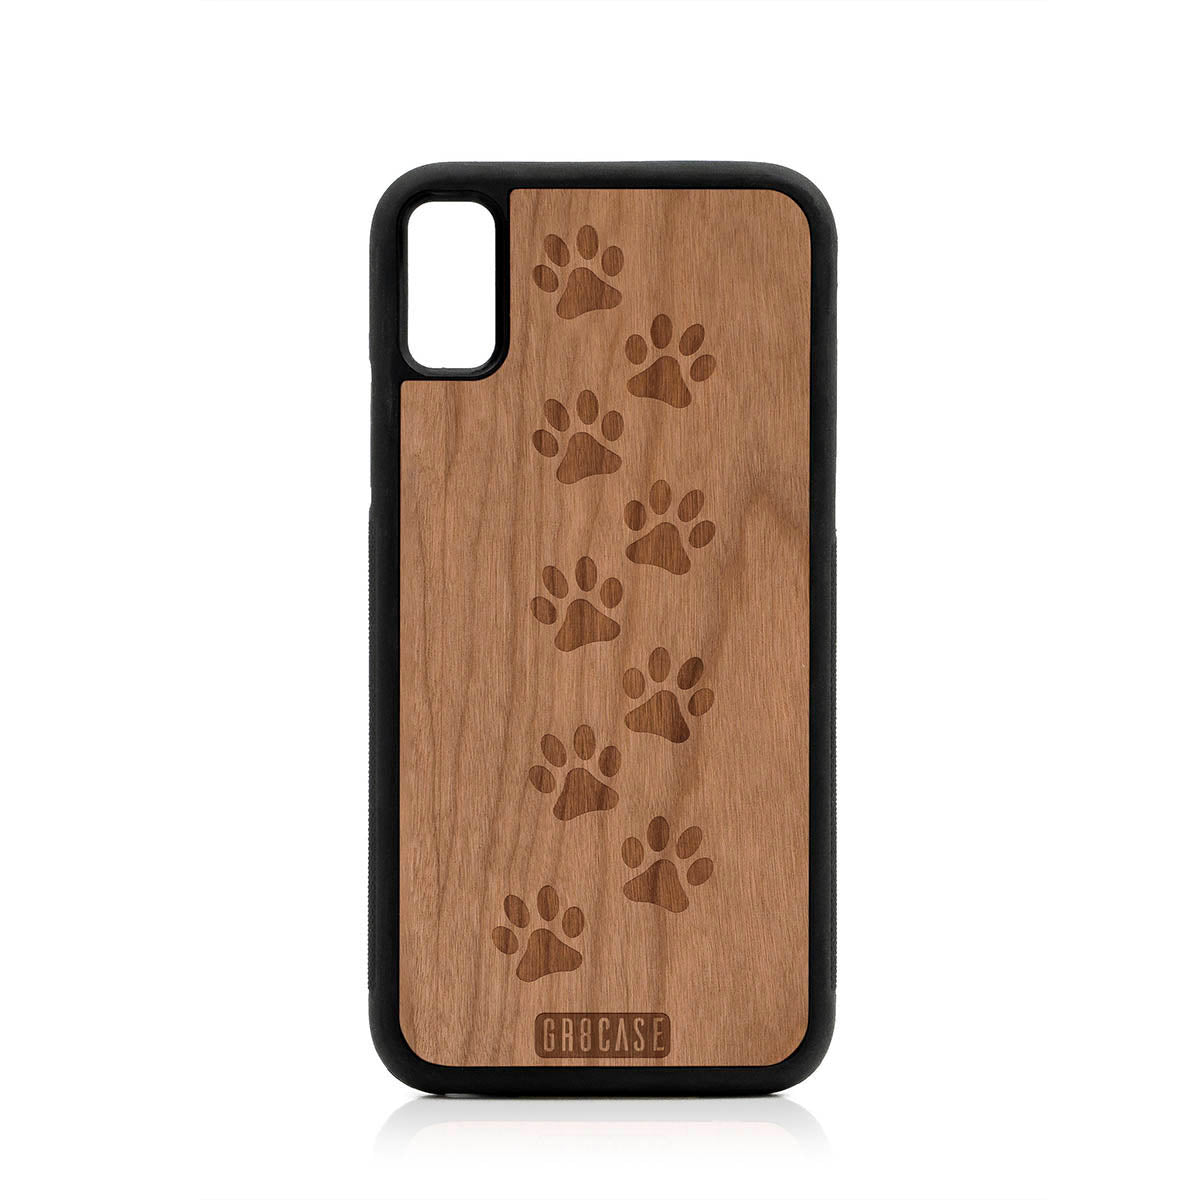 Paw Prints Design Wood Case For iPhone X/XS by GR8CASE